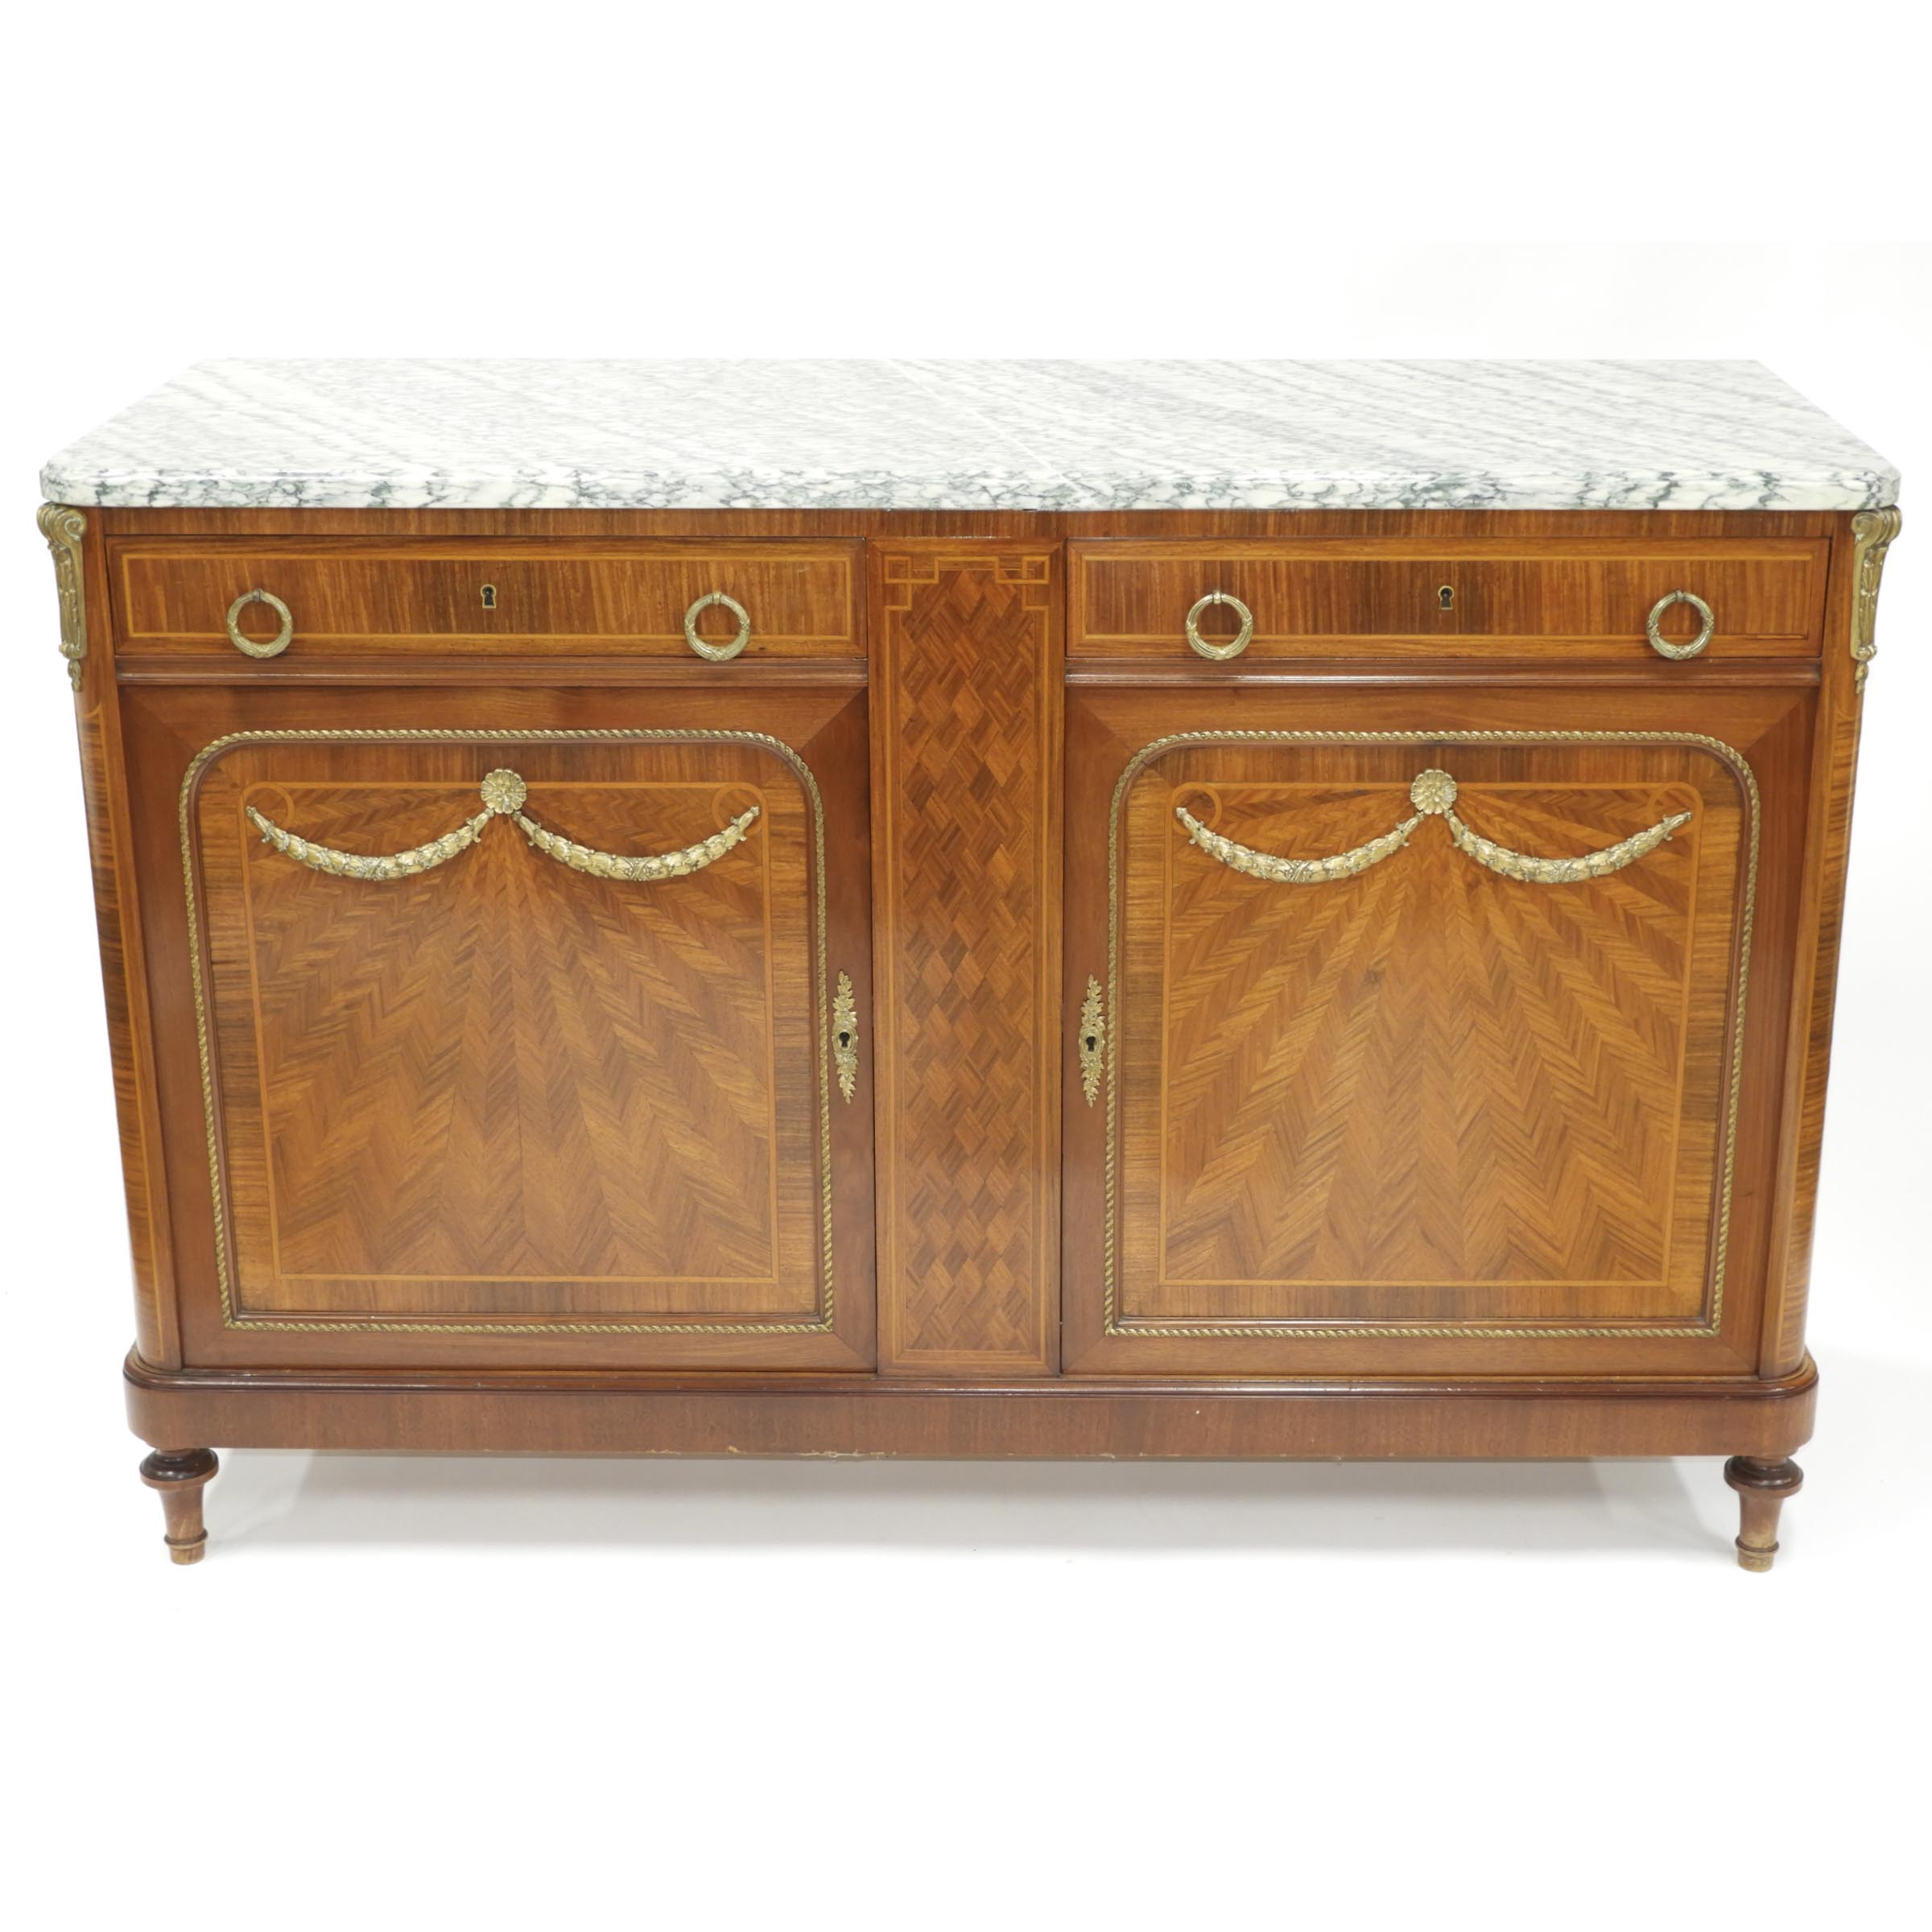 French Belle Epoque Ormolu Mounted Satinwood Parquetry Sideboard, early 20th century